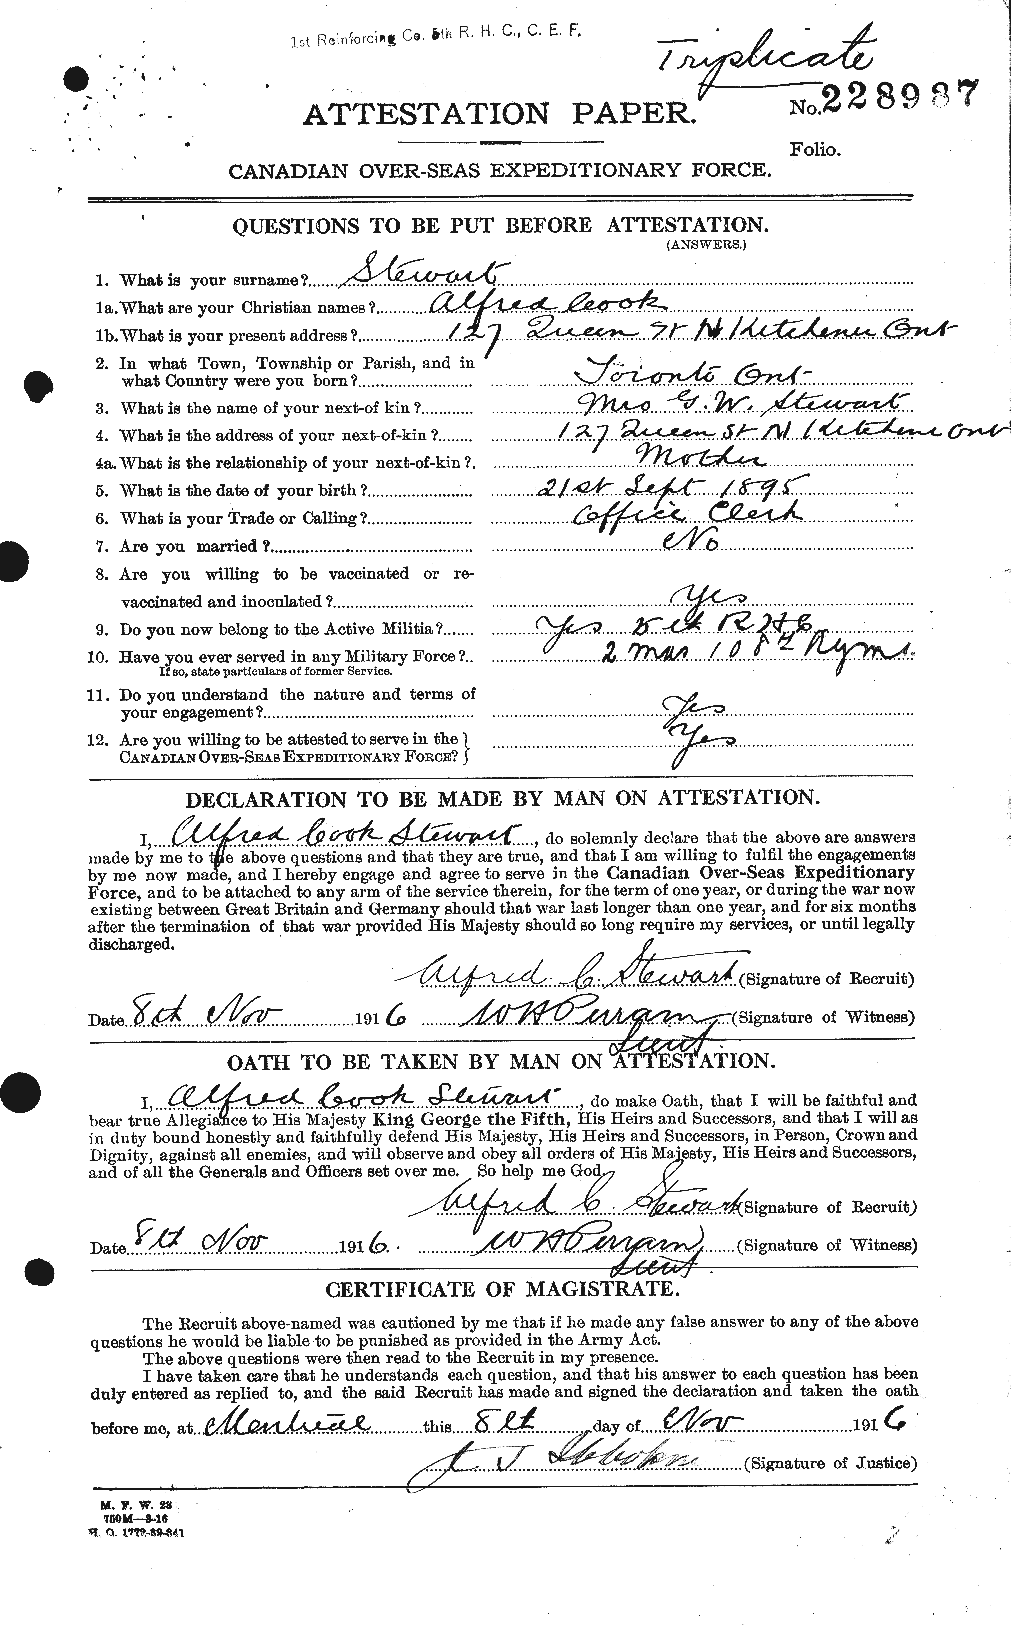 Personnel Records of the First World War - CEF 118549a